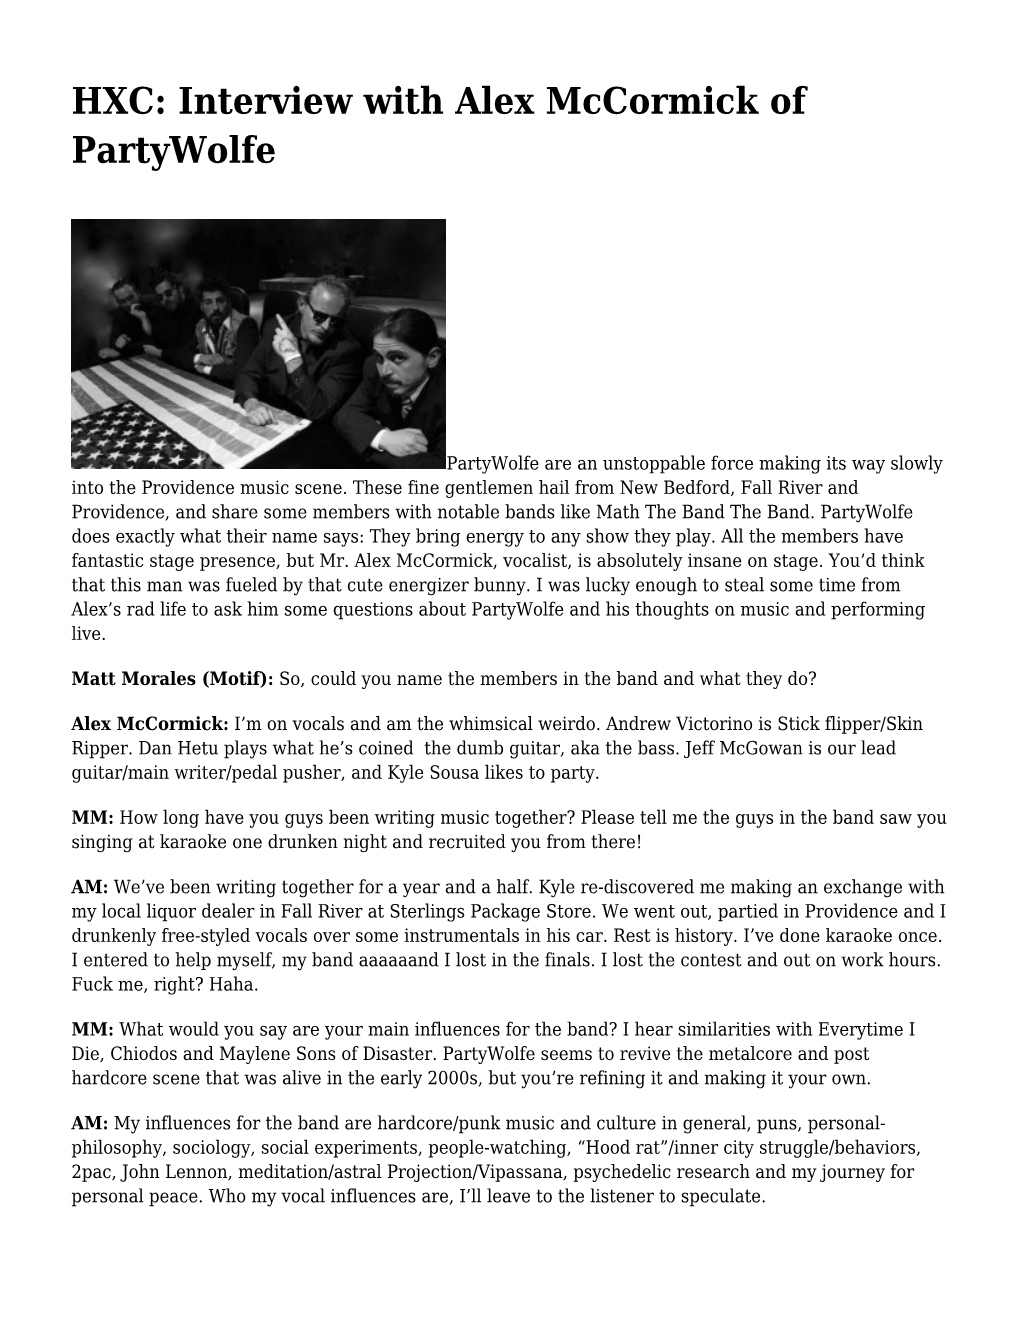 HXC: Interview with Alex Mccormick of Partywolfe,Hxc: Make Punk